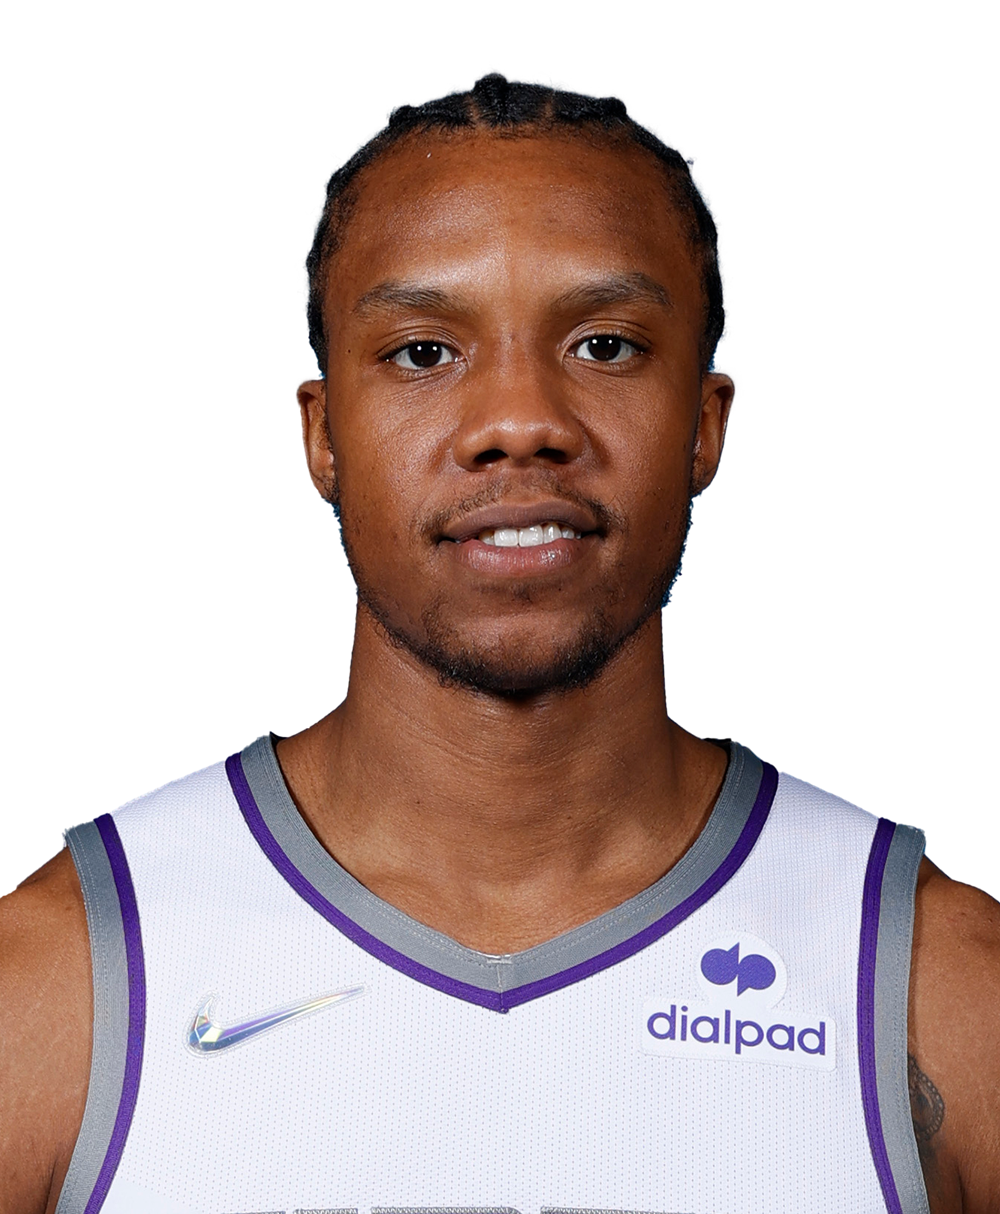 Sharife Cooper - NBA Point guard - News, Stats, Bio and more - The